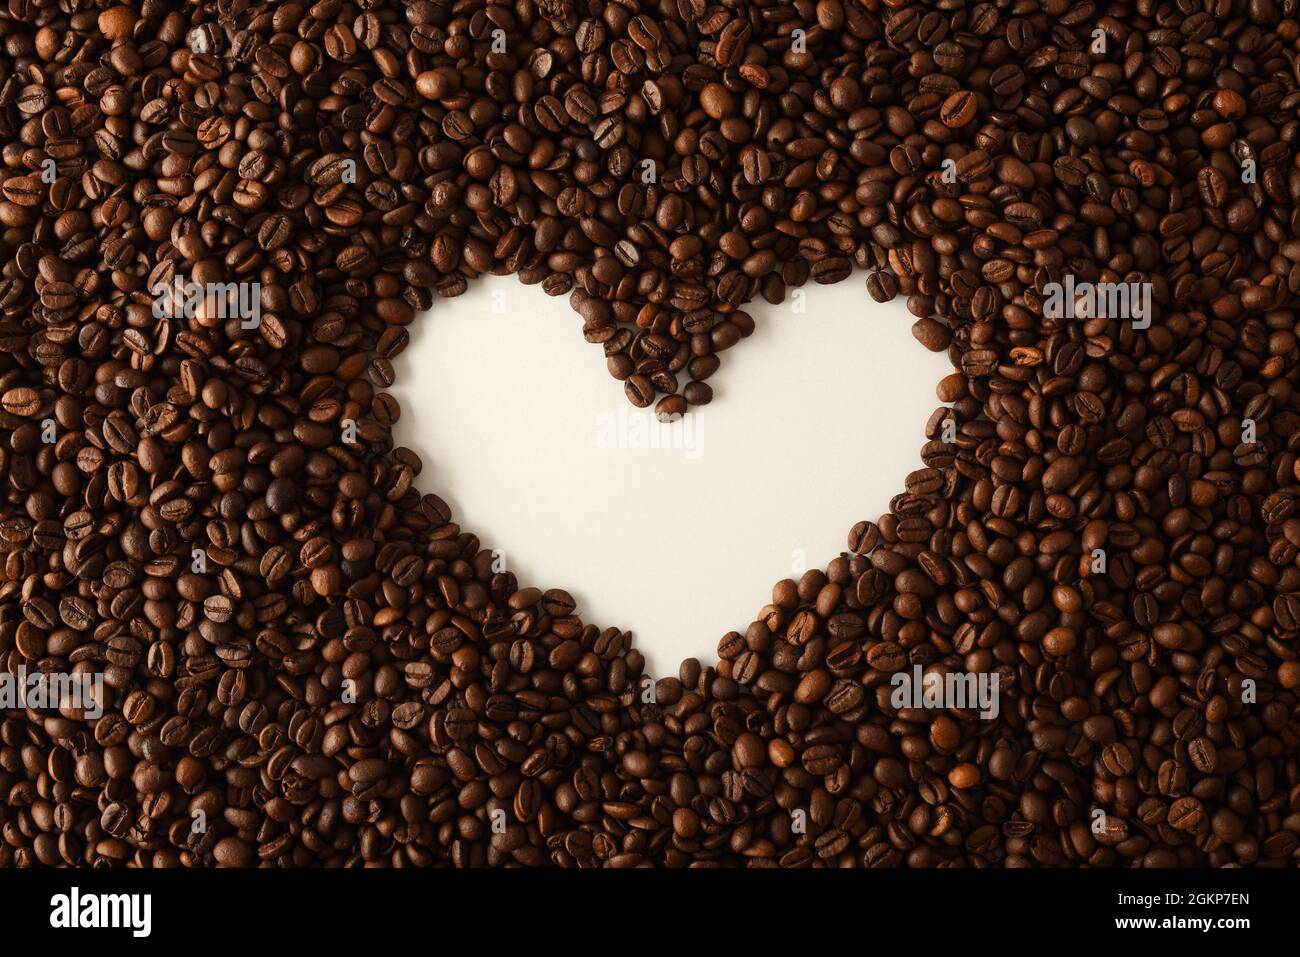 Pile of coffee beans with hollow on a white table forming the shape of a heart. Top view. Horizontal composition. Stock Photo